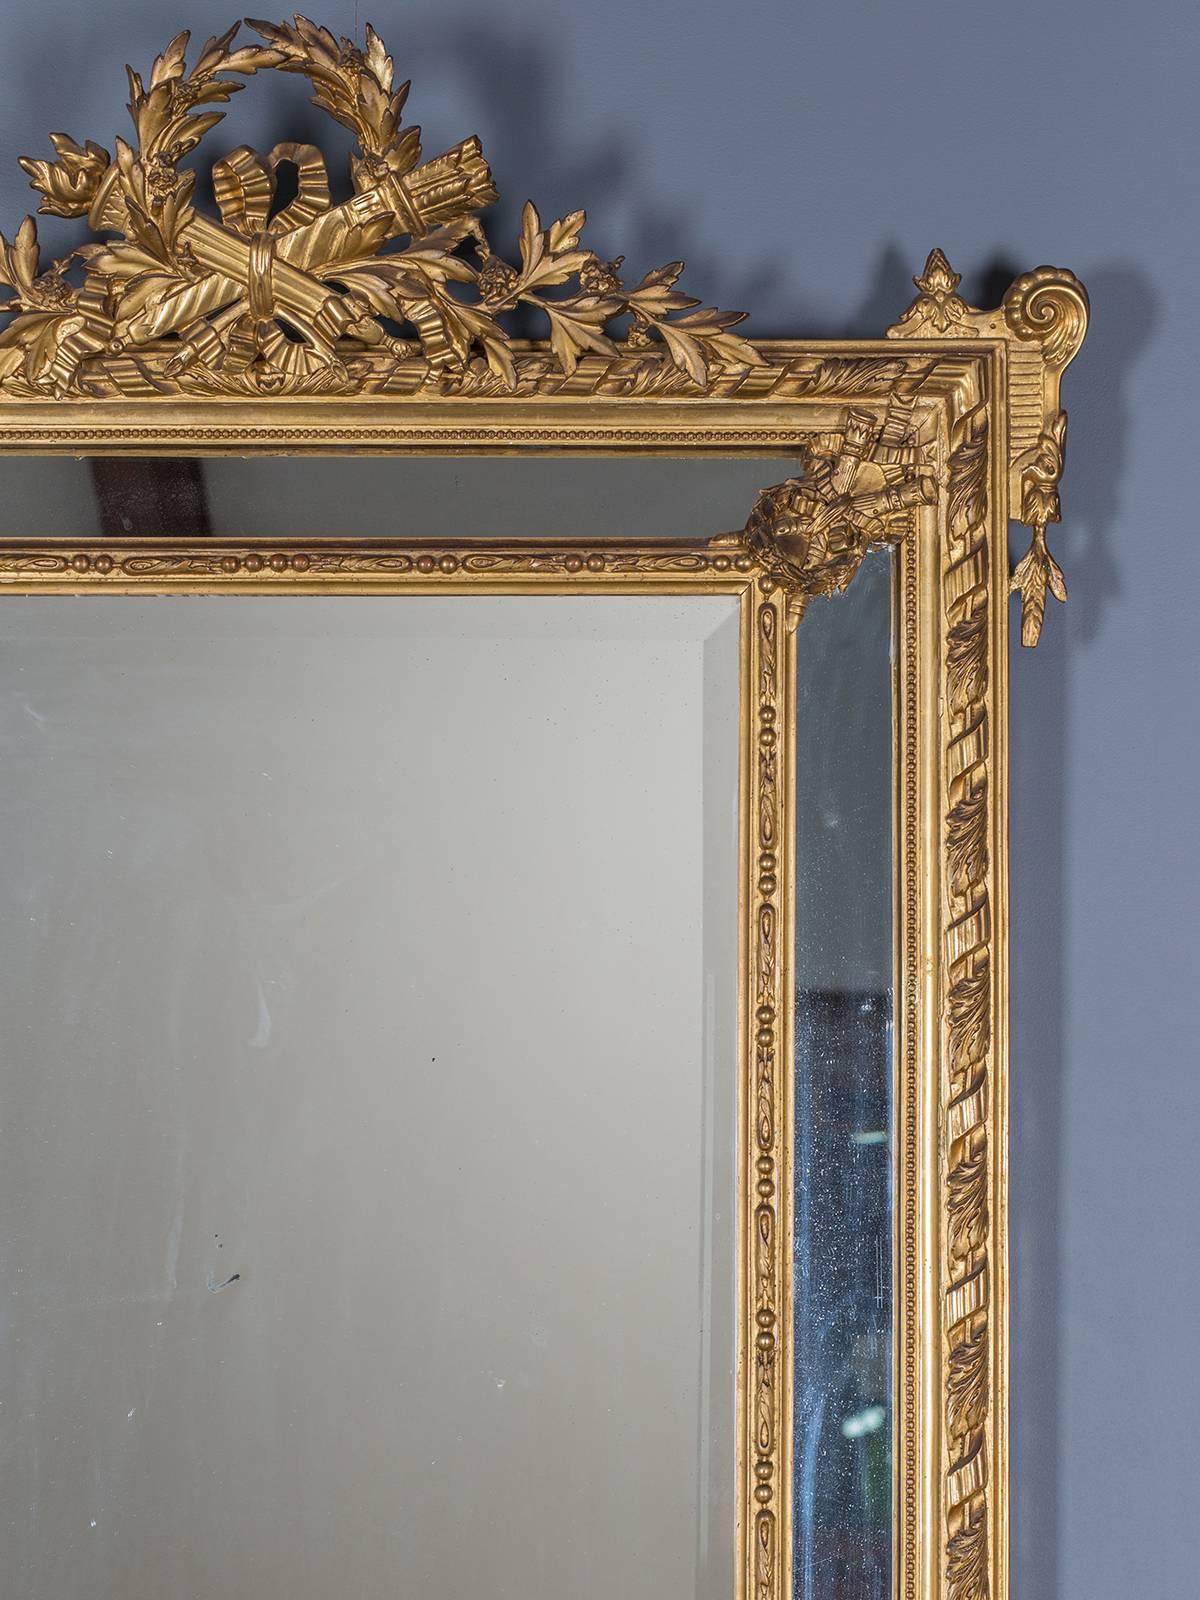 Receive our new selections direct from 1stdibs by email each week. Please click Follow Dealer below and see them first!

The lavish detail on this antique French mirror is a testament to the power of French design. Tall in proportion, this antique